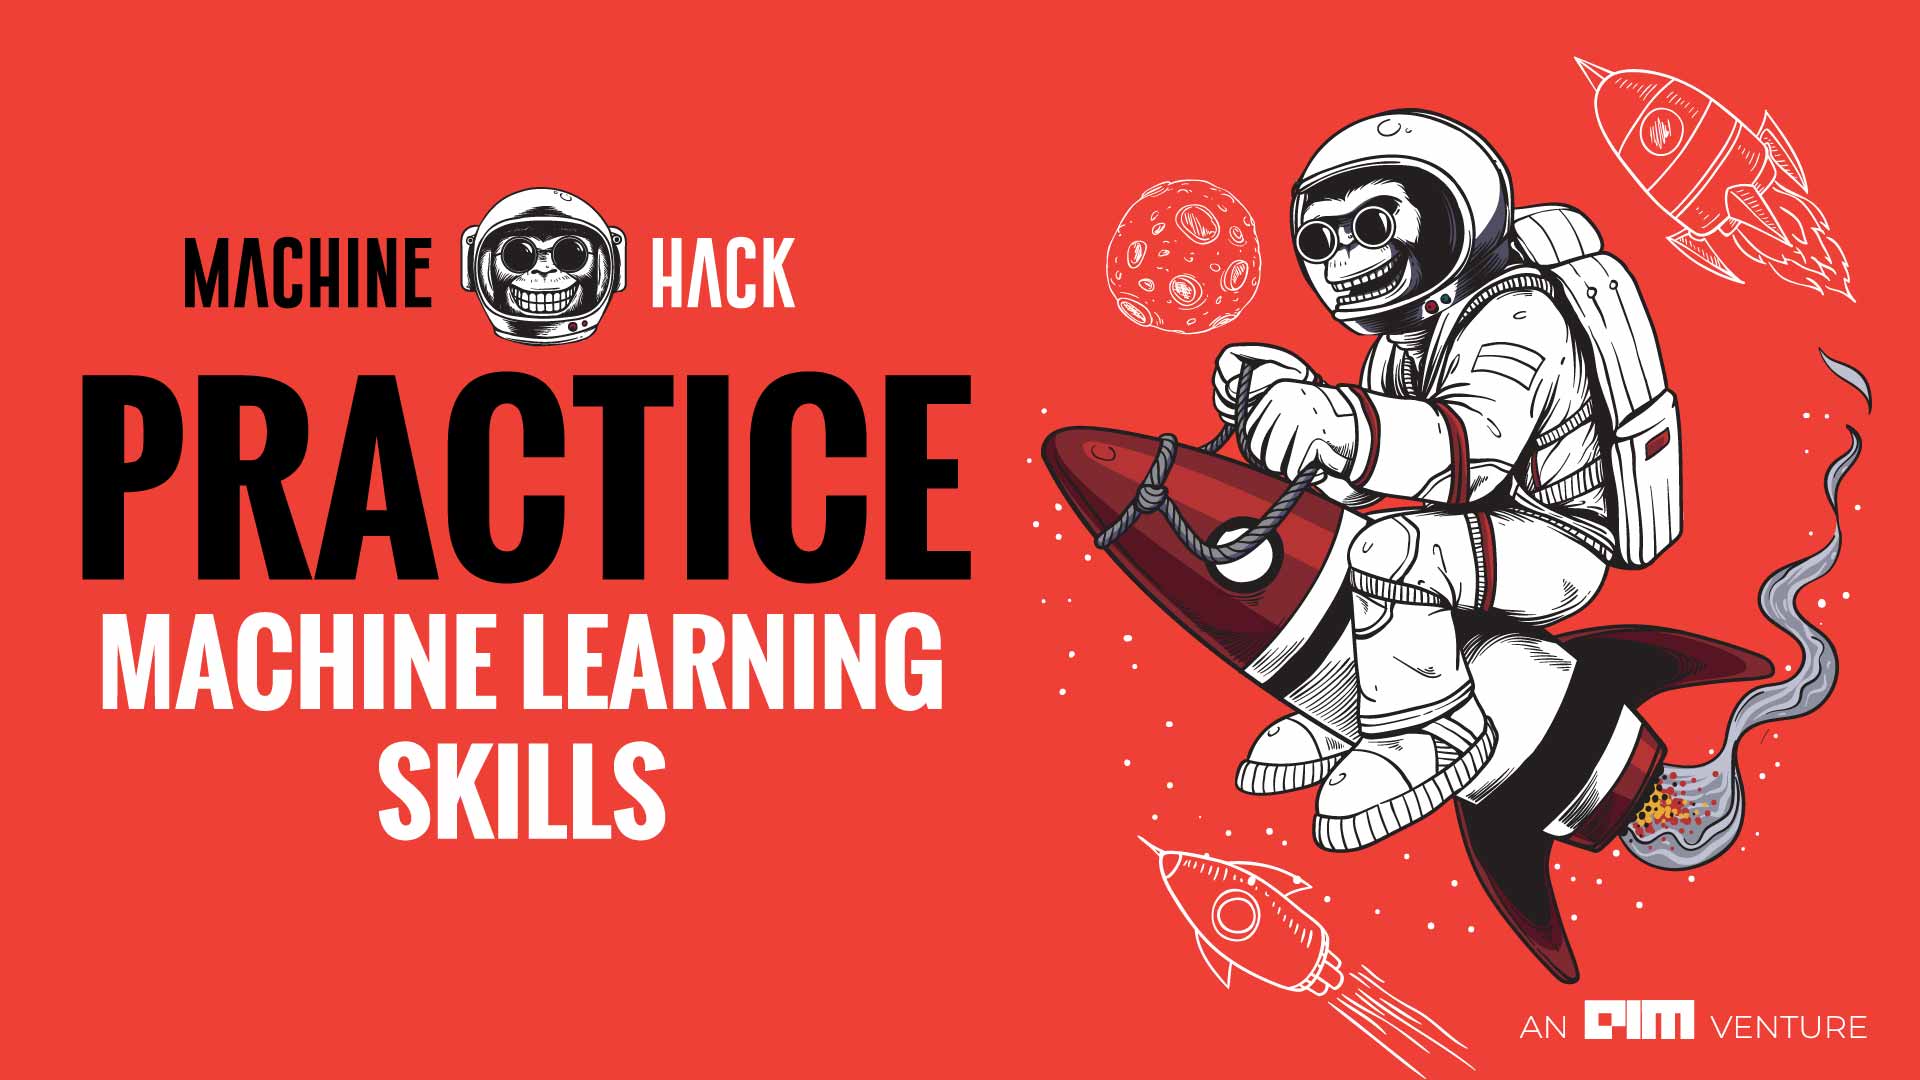 You Can Now Practice Machine Learning Skills On All-New MachineHack Platform